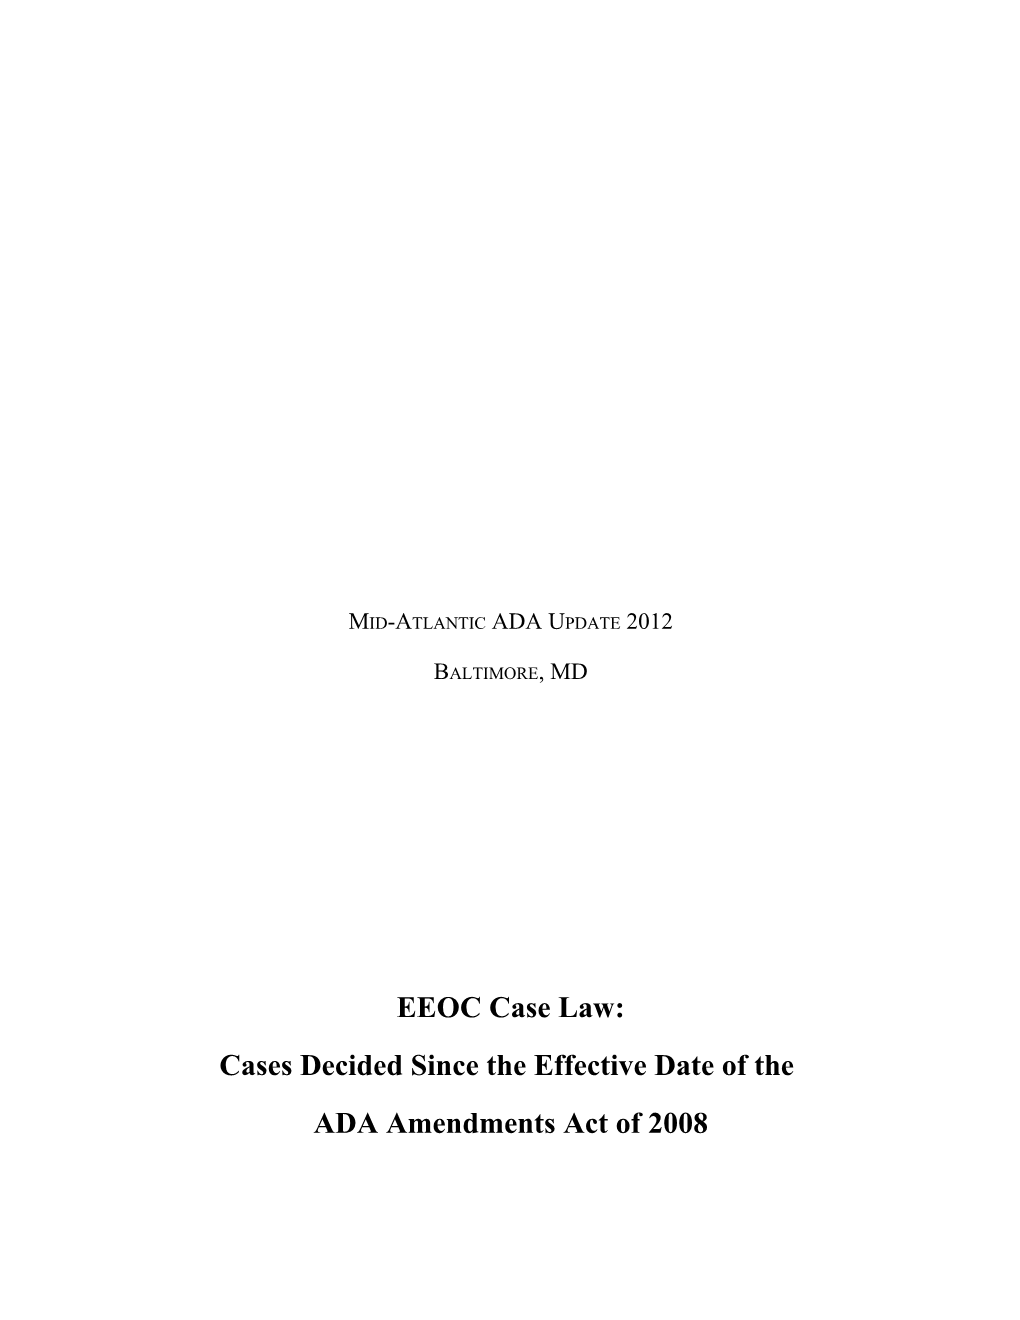 Cases Decided Since the Effective Date of The